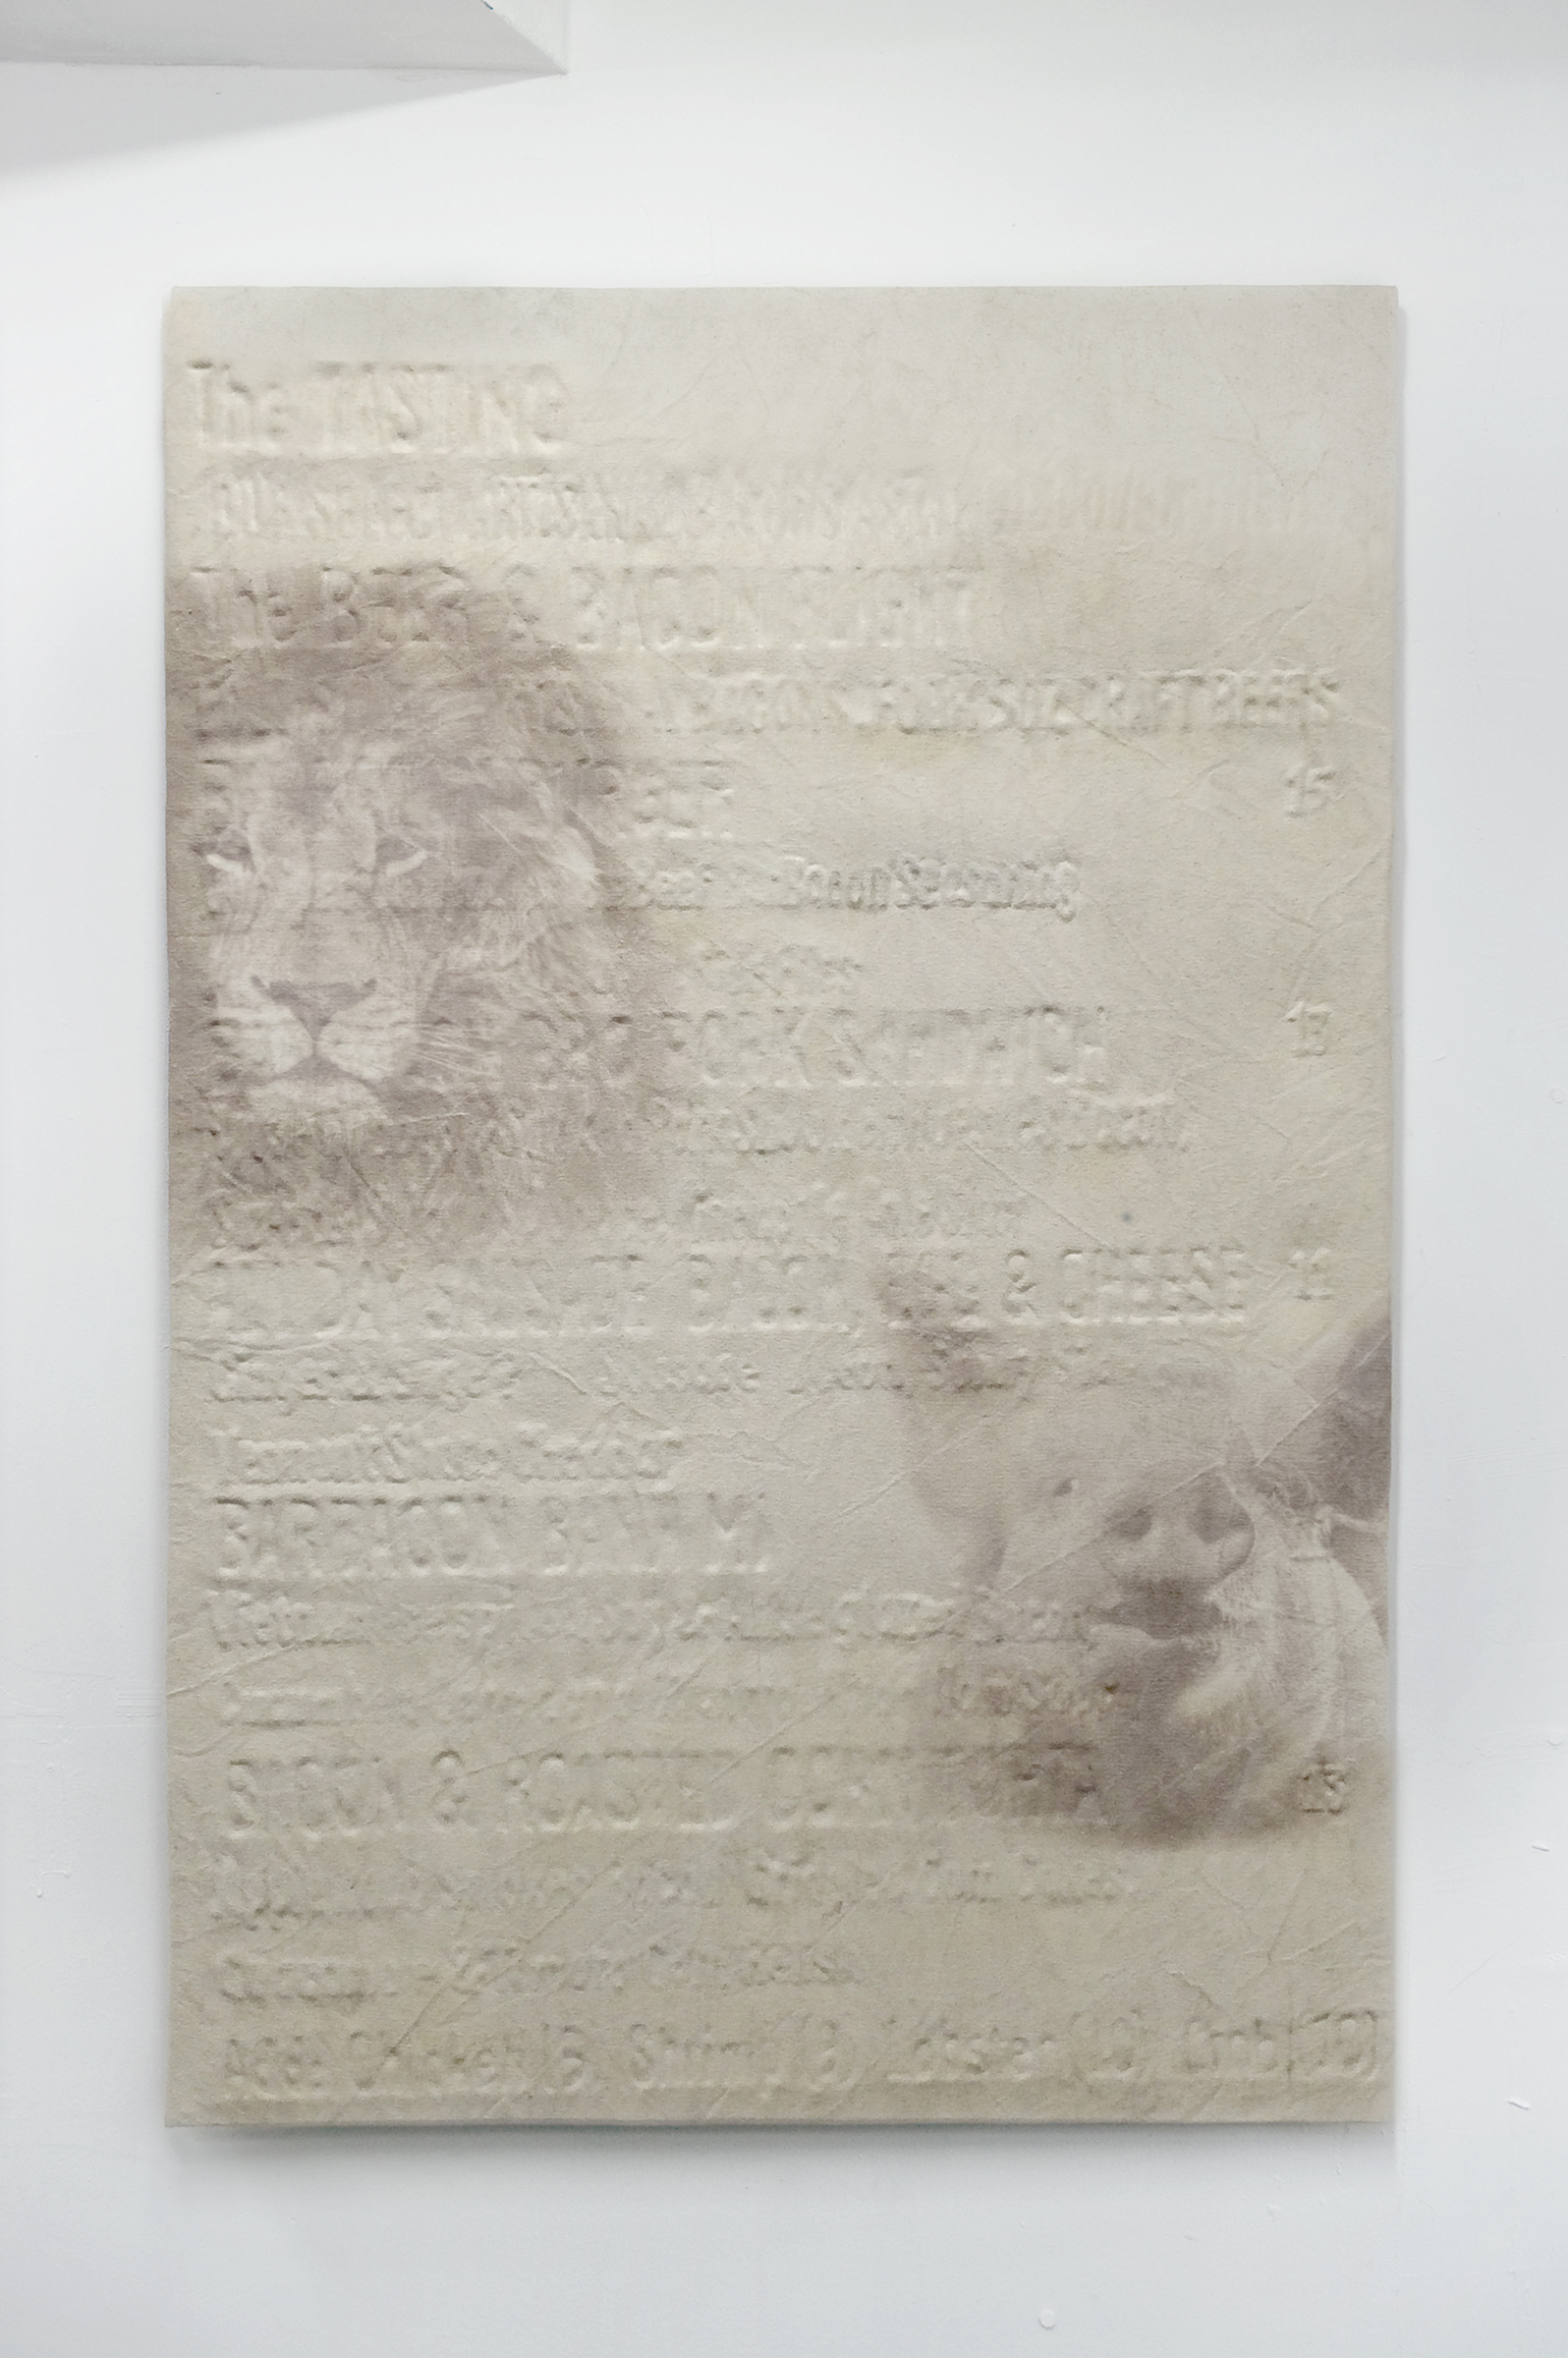  Michael Assiff,&nbsp; Untitled (Barbacon Menu, Babe and Cecil) ,&nbsp;plastic and ink on canvas,&nbsp;48 x 32 in 